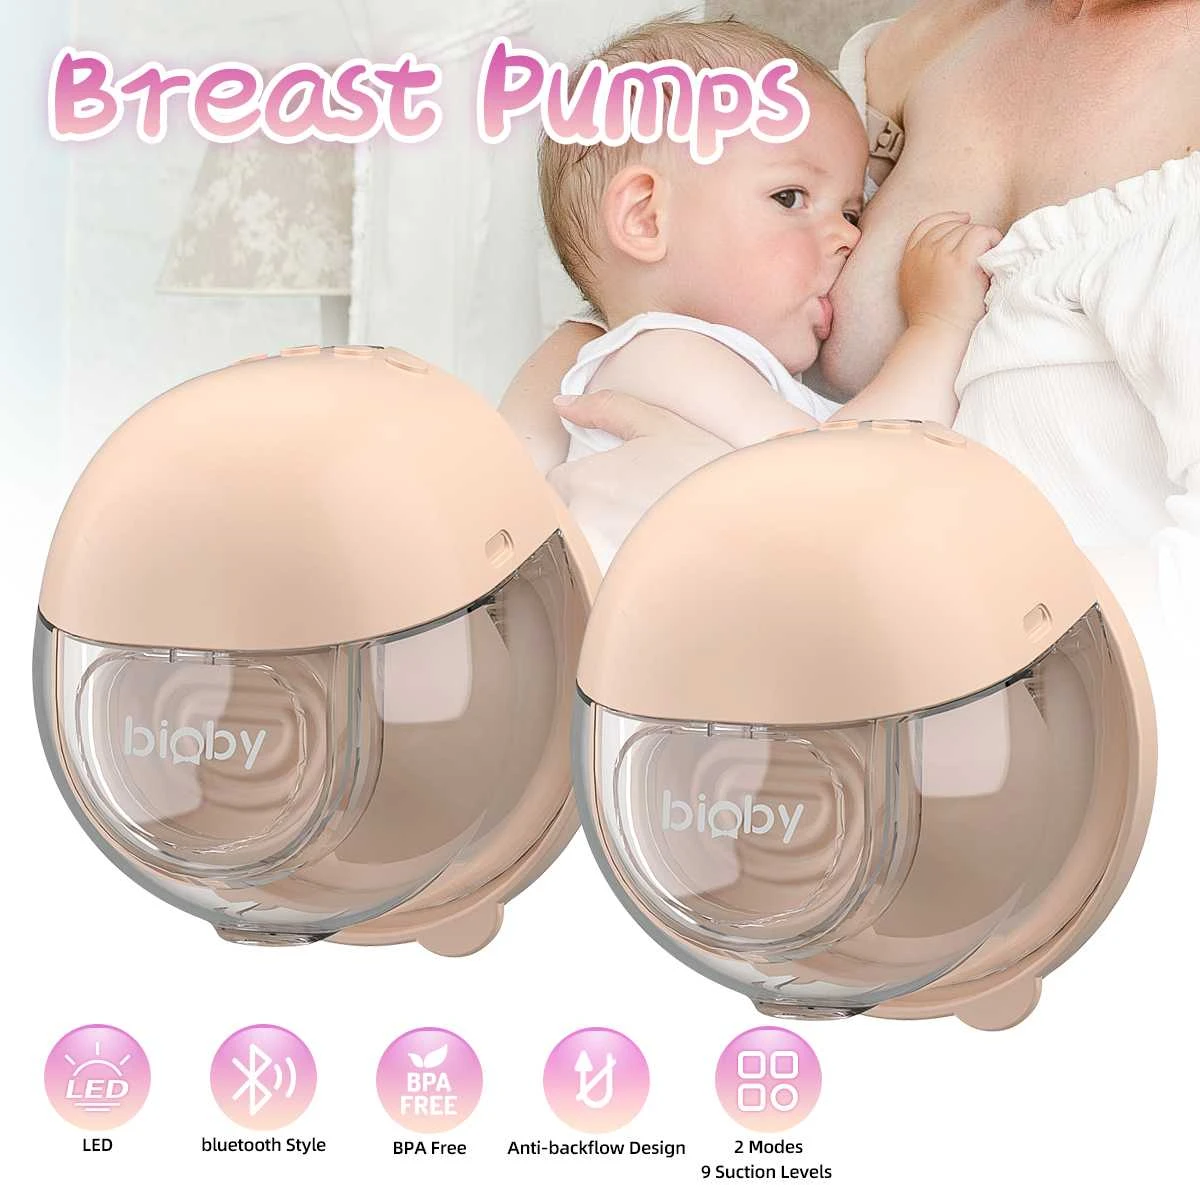 hands free electric breast pump Bioby Electric Breast Pump Hand Free Baby Portable Wearable BPA free Comfort Breastfeeding Milk Extractor Baby Accessories NEW affordable electric breast pump